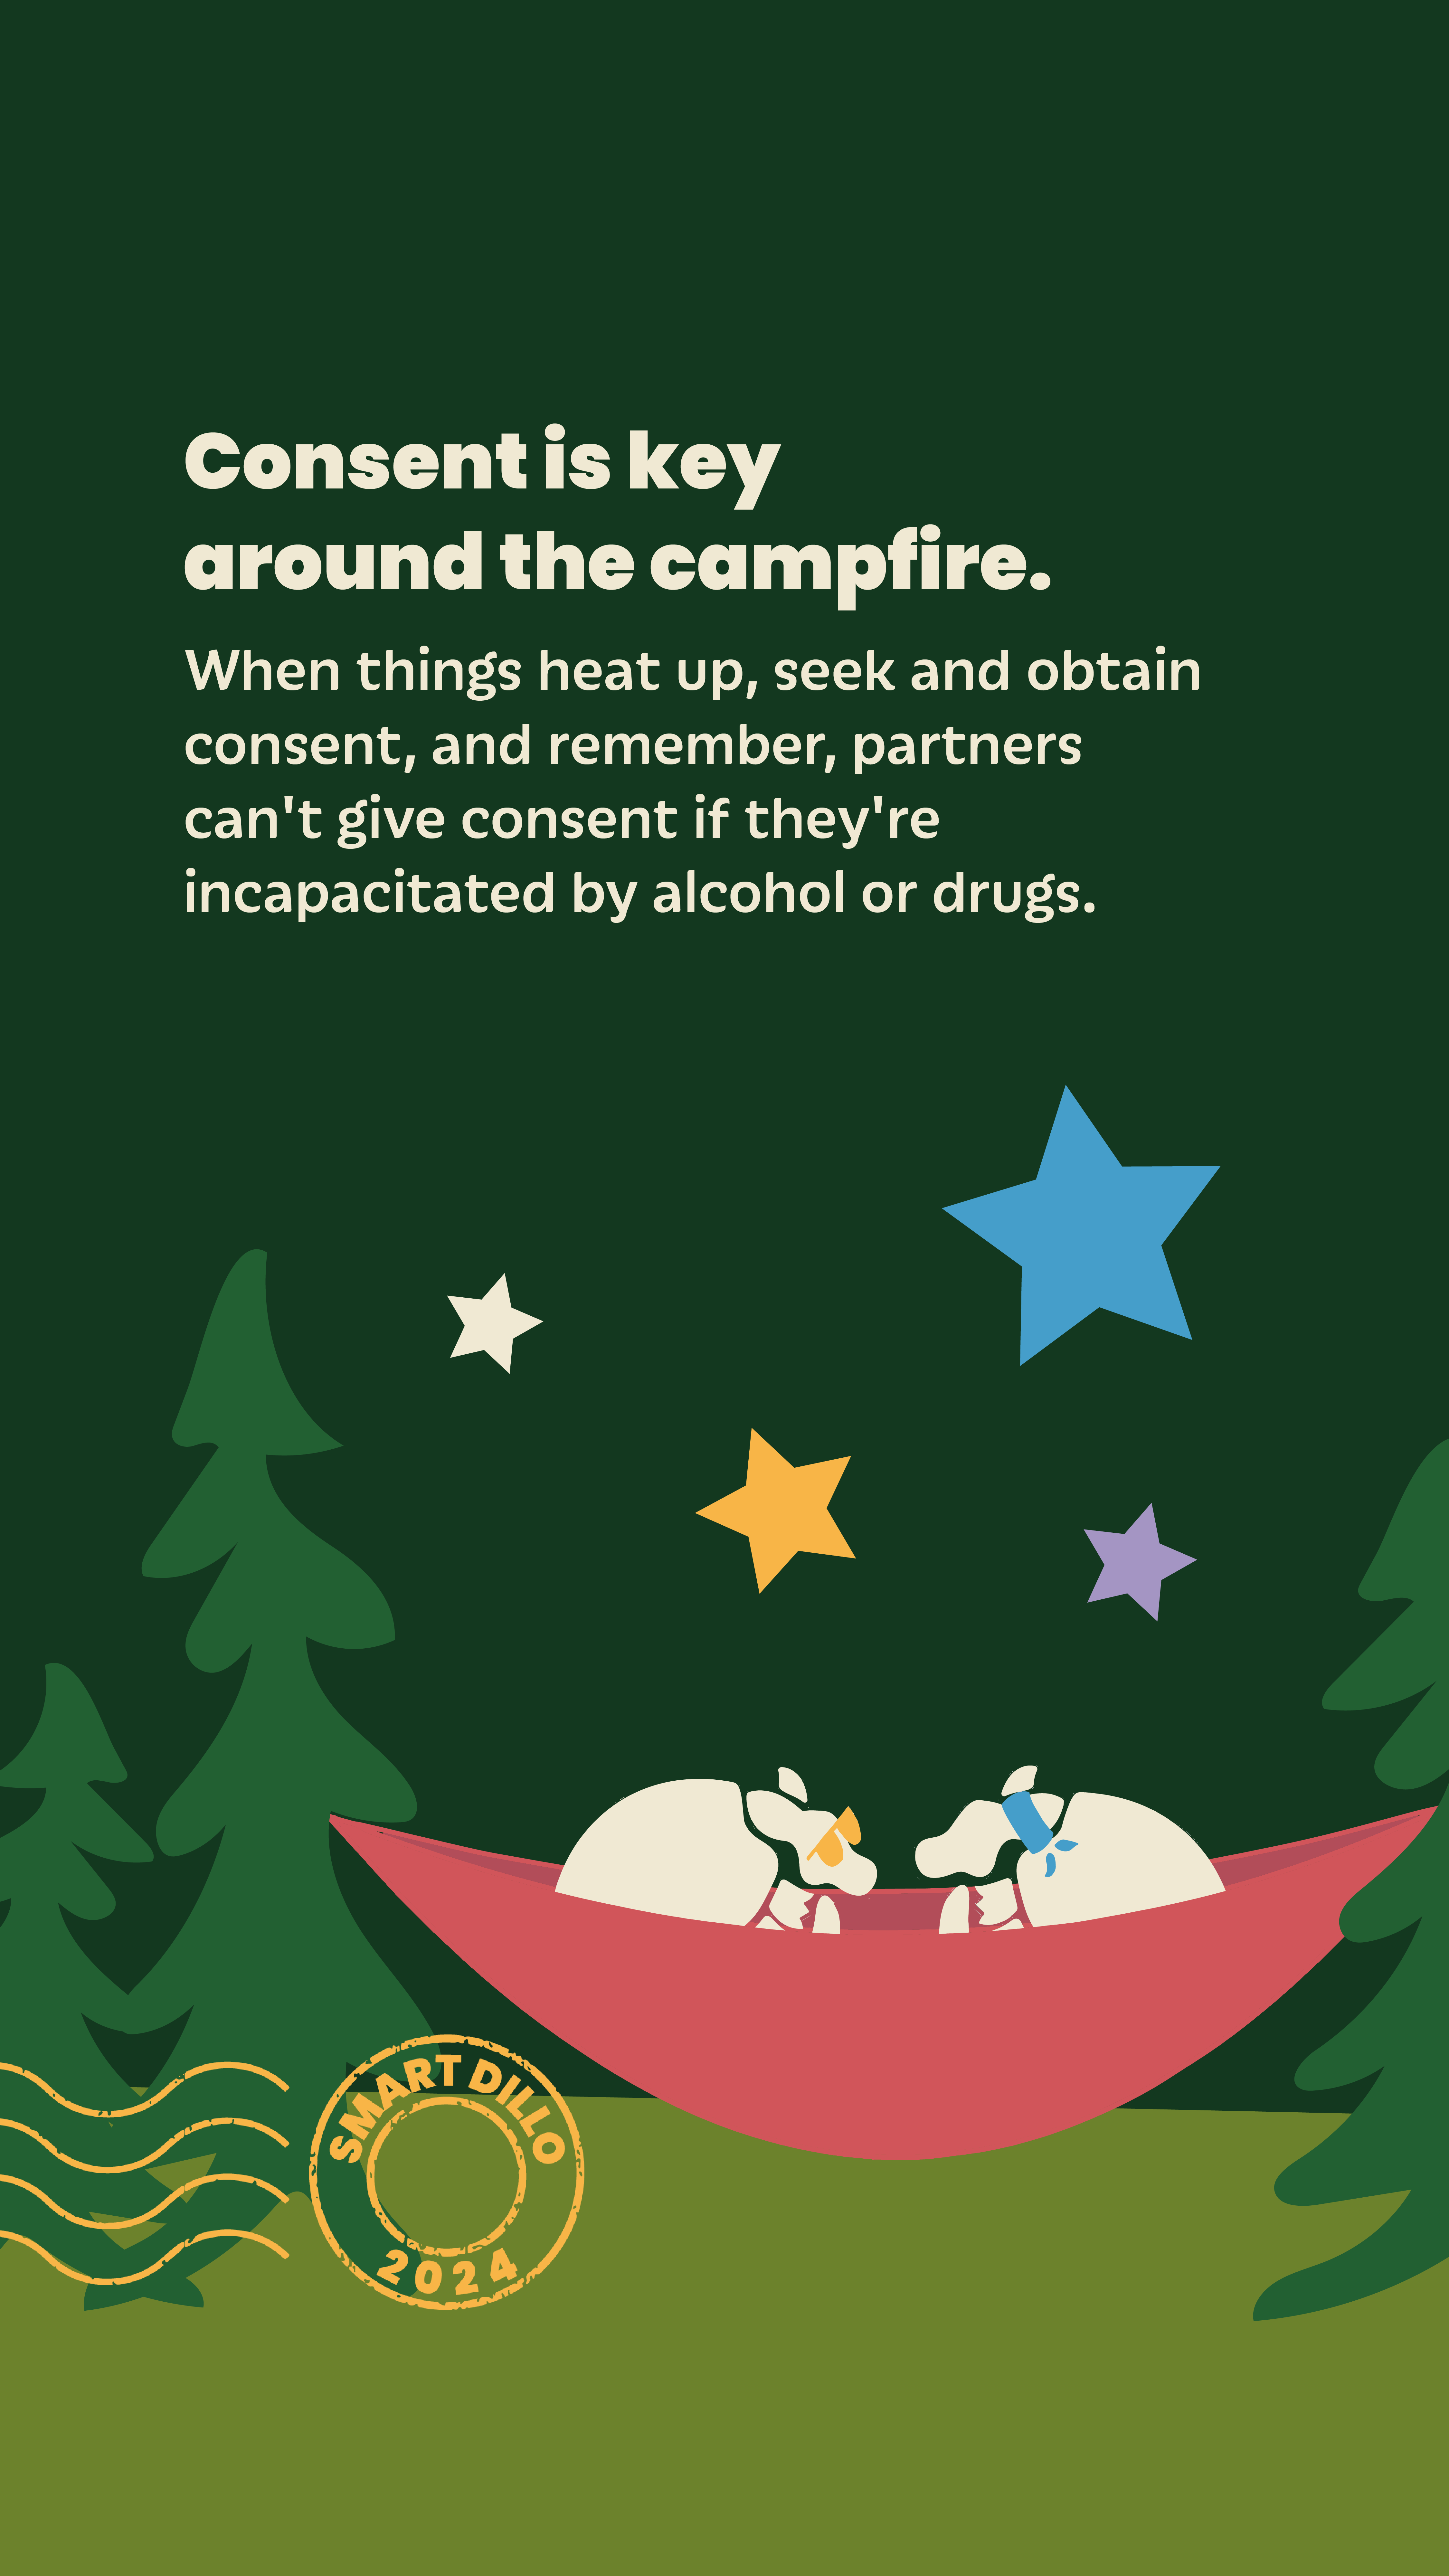 camping campaign - consent